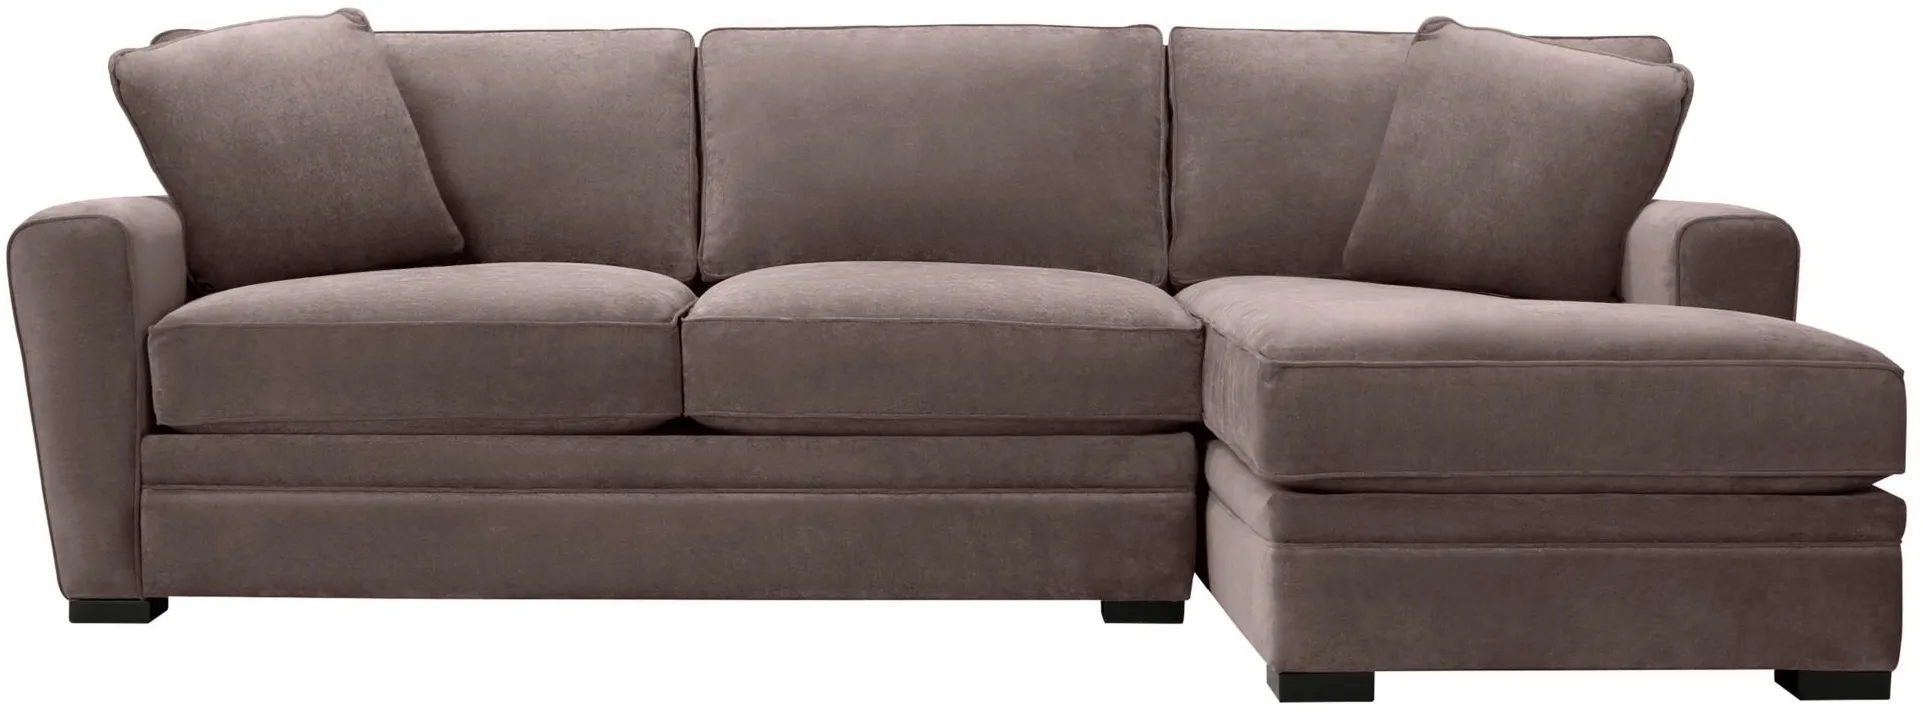 Artemis II 2-pc. Full Sleeper Right Hand Facing Sectional Sofa in Gypsy Truffle by Jonathan Louis